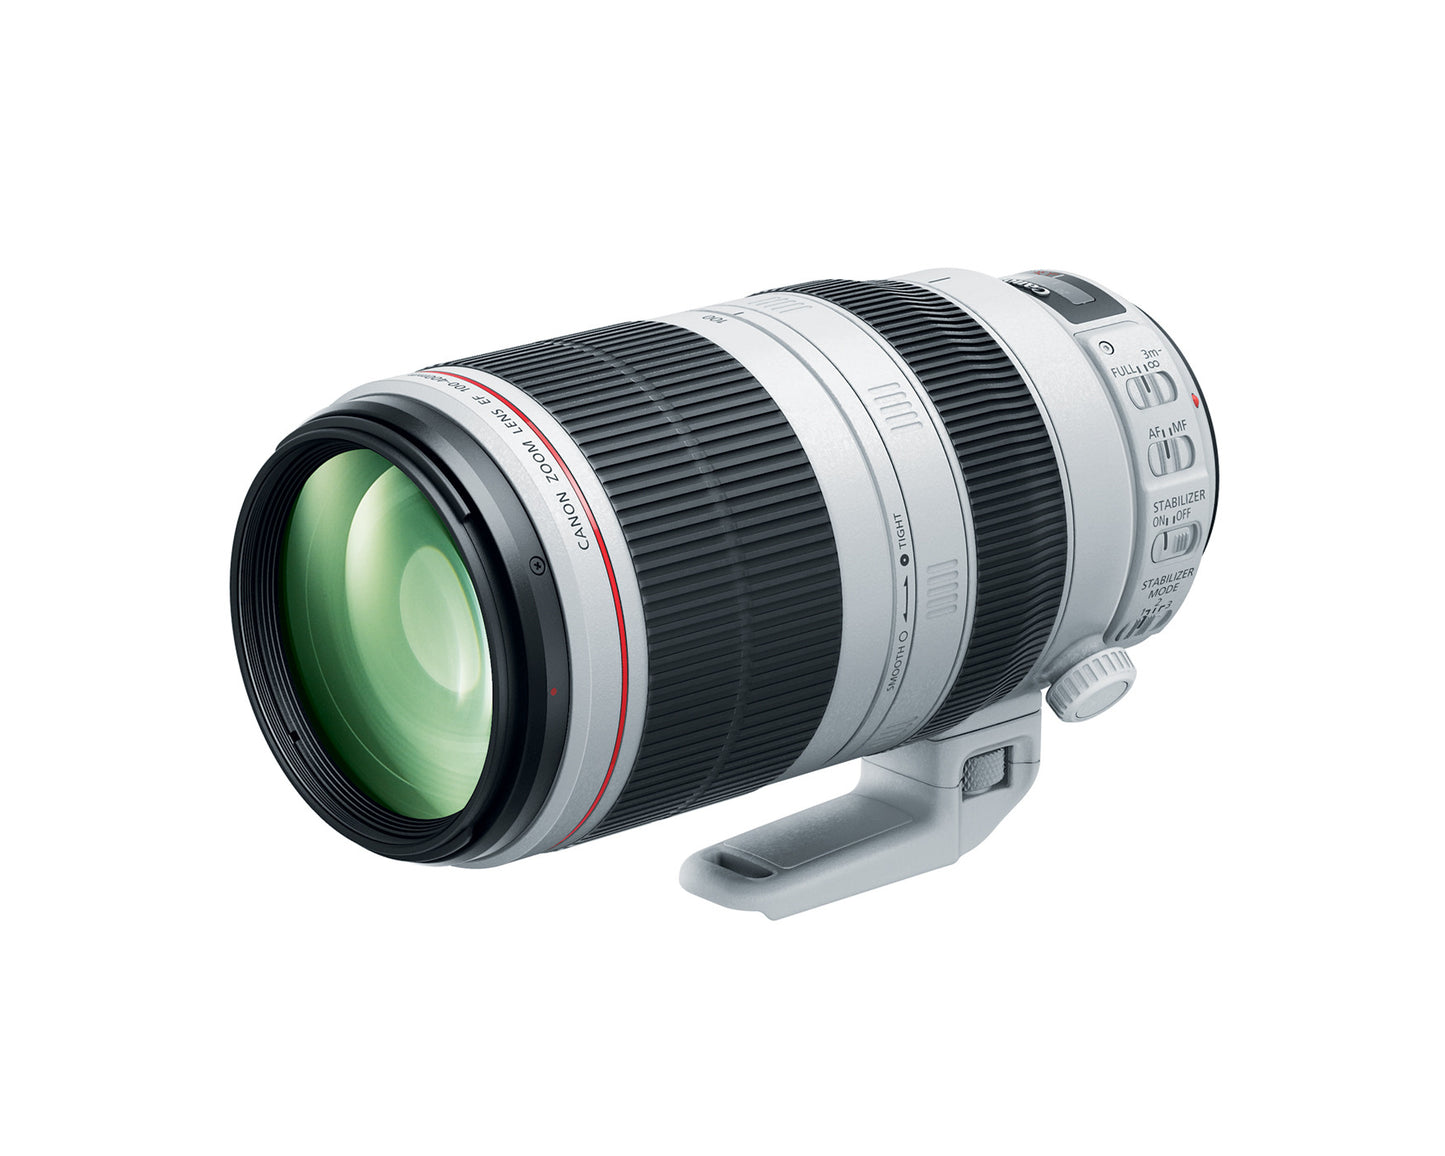 Canon EF 100-400mm f/4.5-5.6L IS USM II